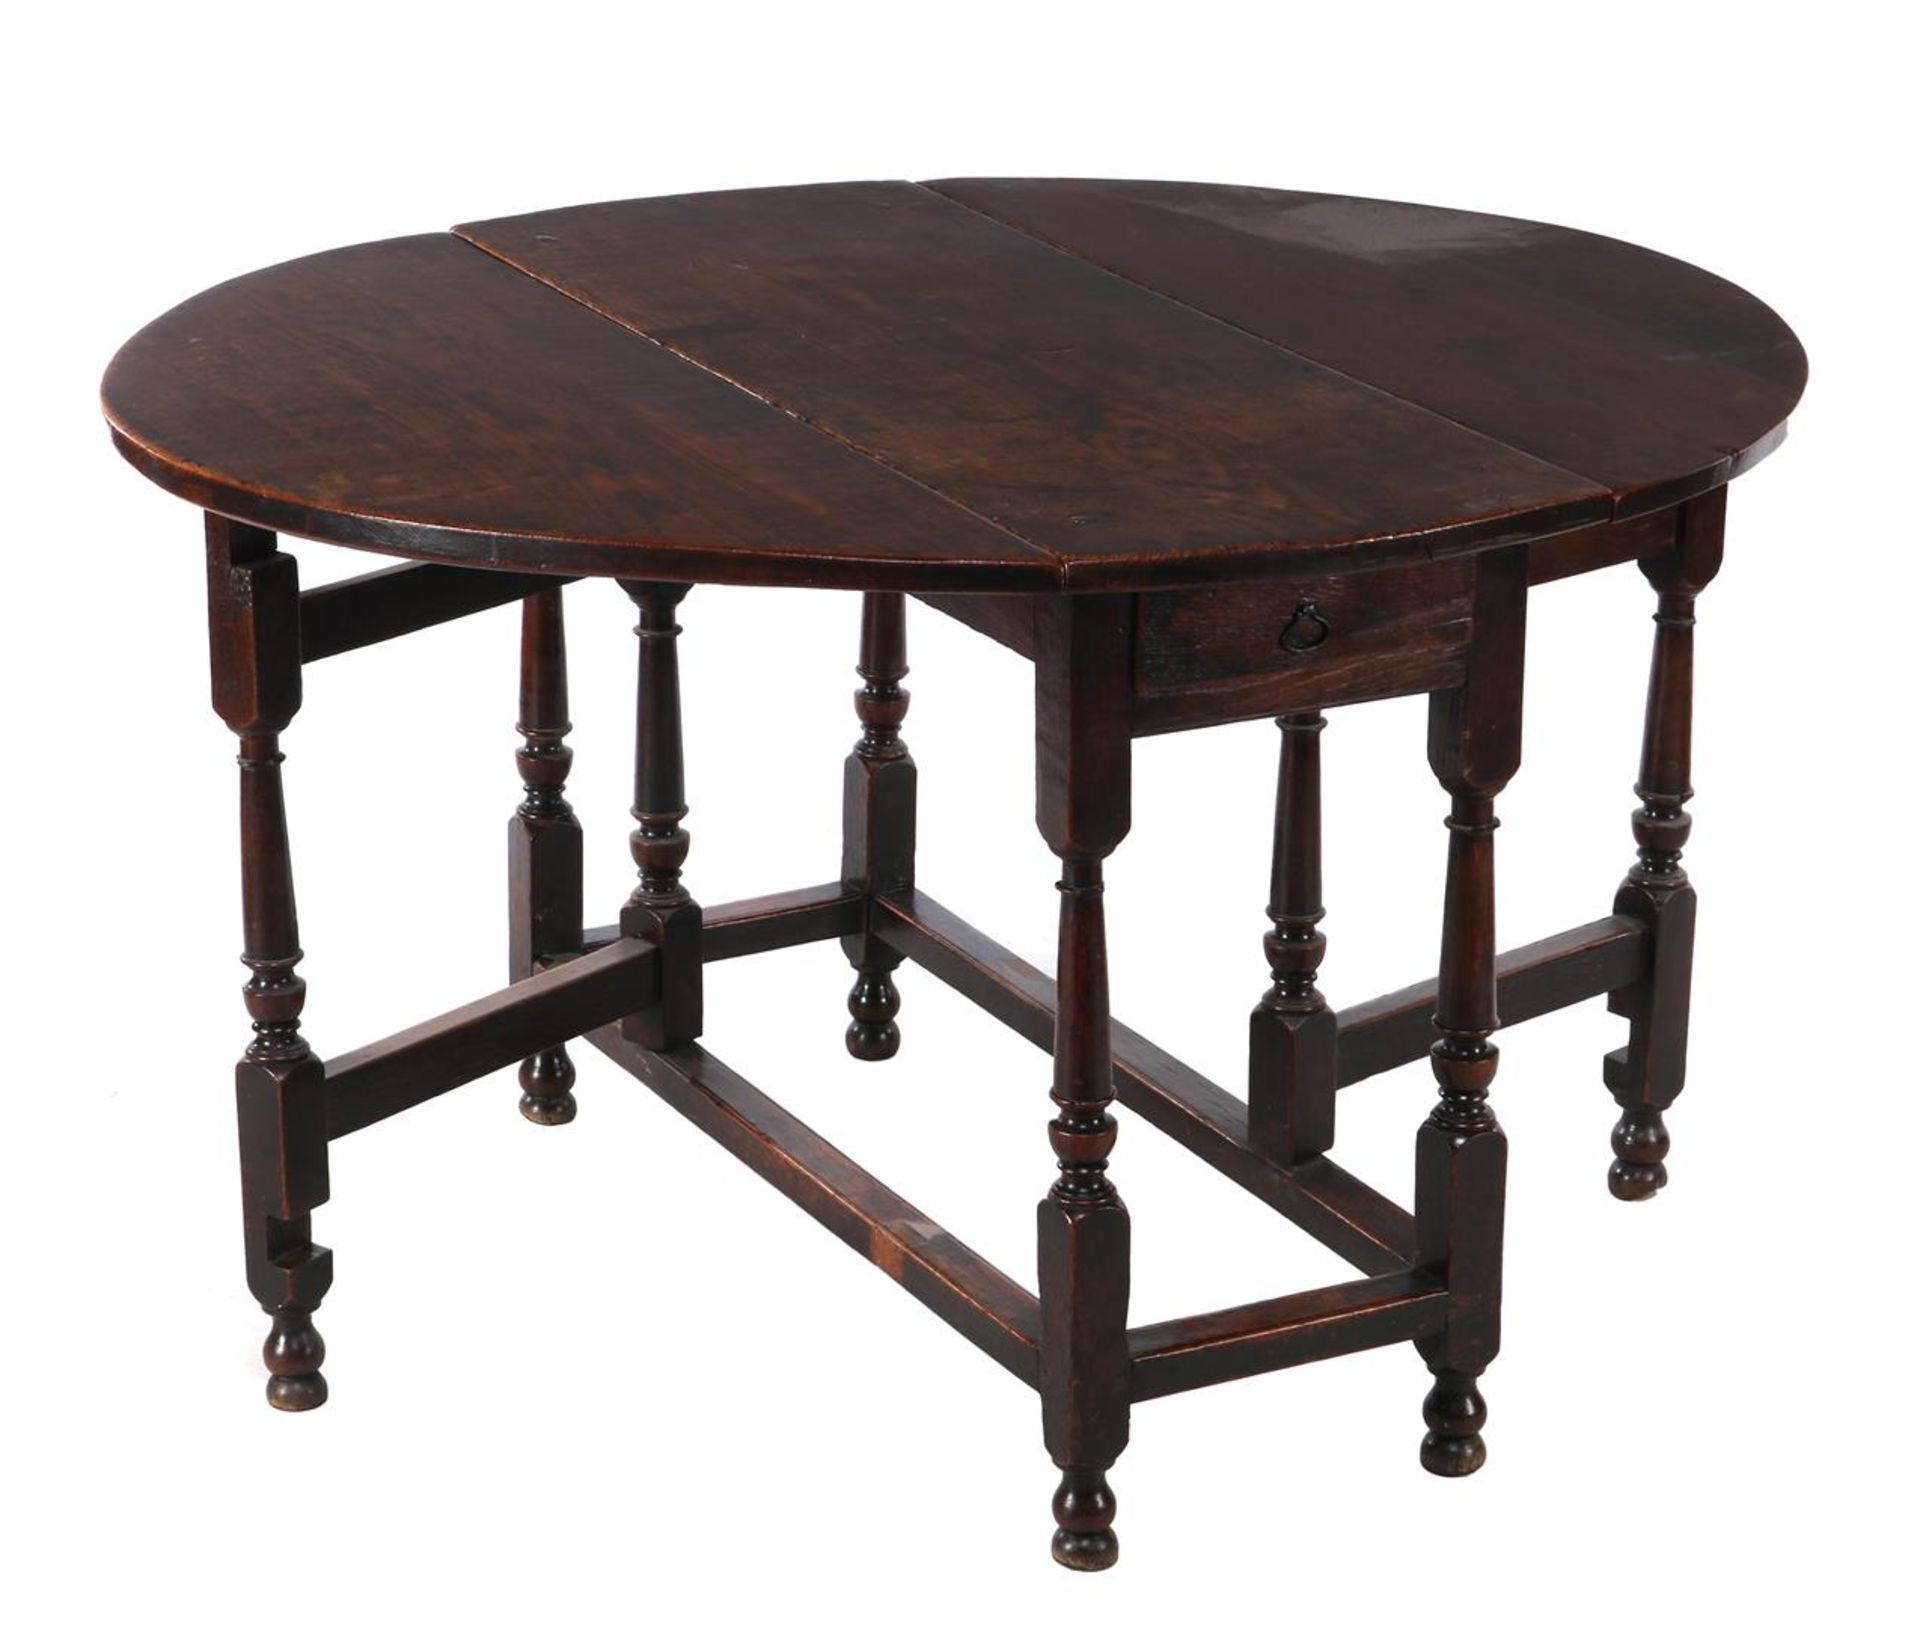 Oak drop-leaf table with drawer